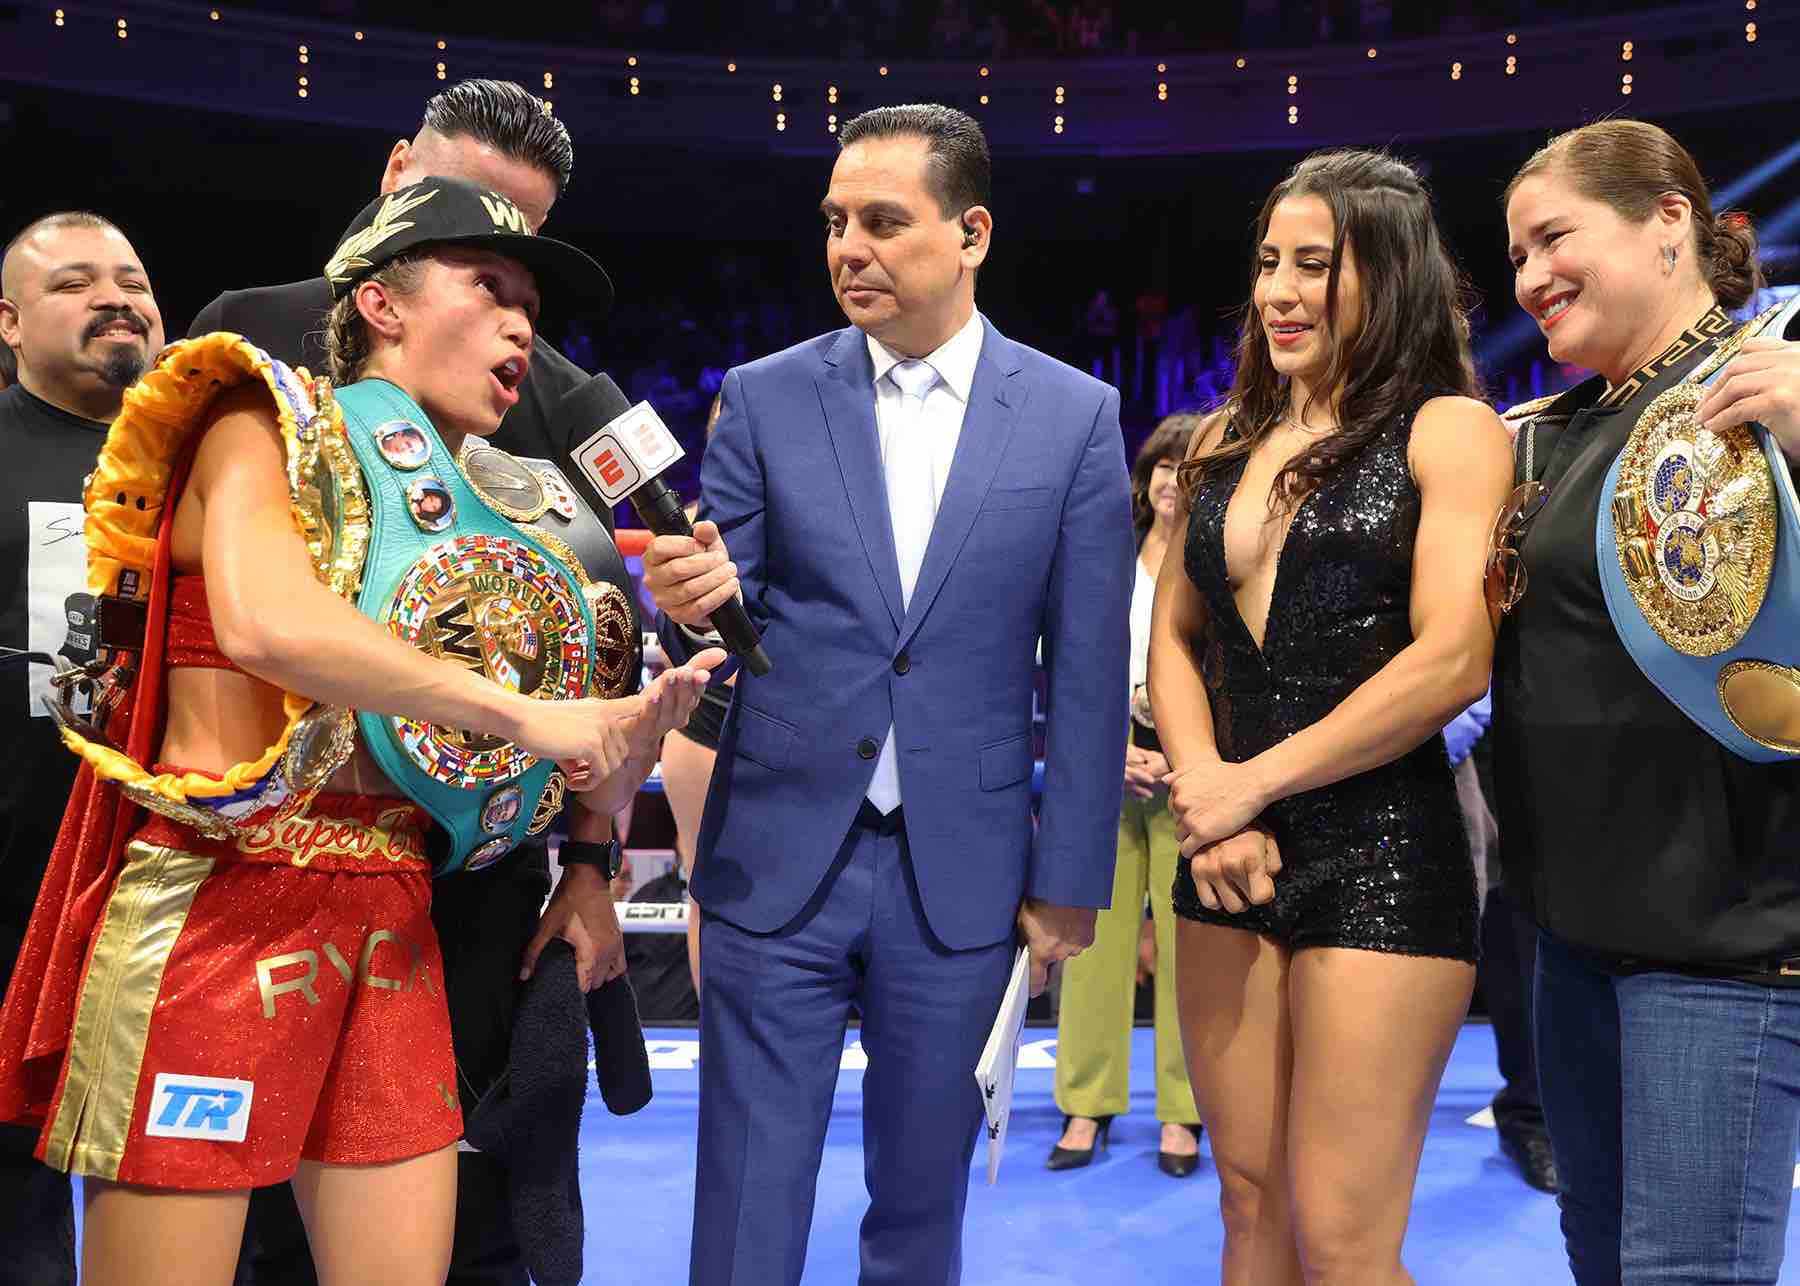 Estrada edges Yudica, confronts Valle after fight